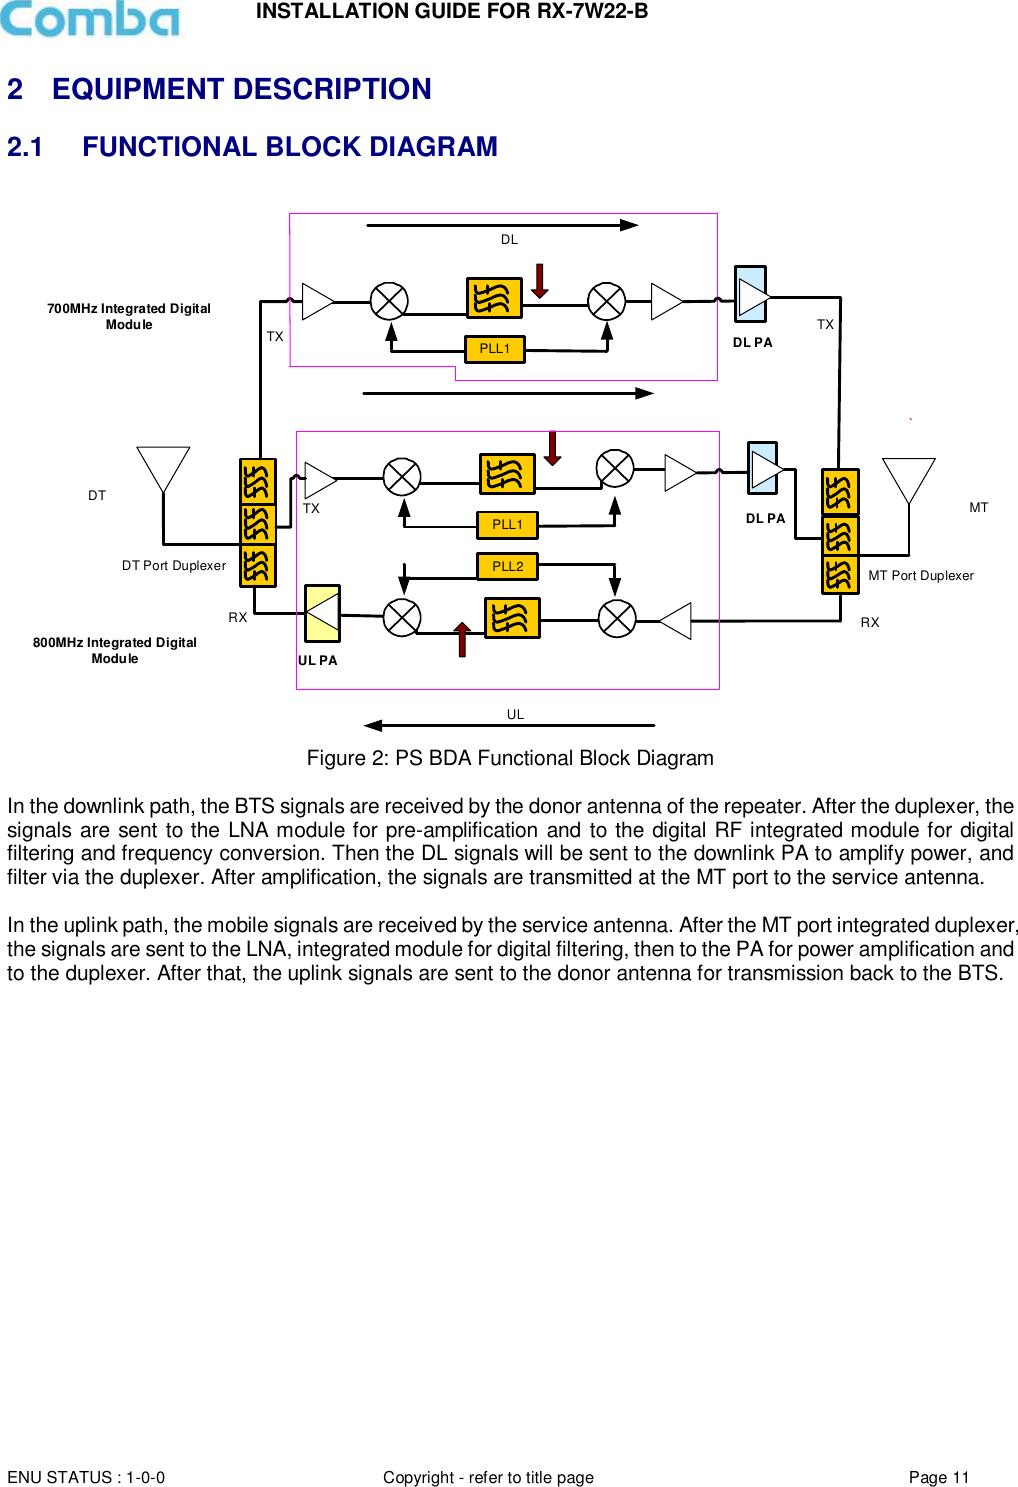 INSTALLATION GUIDE FOR RX-7W22-B  ENU STATUS : 1-0-0 Copyright - refer to title page Page 11     2  EQUIPMENT DESCRIPTION 2.1 FUNCTIONAL BLOCK DIAGRAM   Figure 2: PS BDA Functional Block Diagram  In the downlink path, the BTS signals are received by the donor antenna of the repeater. After the duplexer, the signals are sent to the LNA module for pre-amplification and to the digital RF integrated module for digital filtering and frequency conversion. Then the DL signals will be sent to the downlink PA to amplify power, and filter via the duplexer. After amplification, the signals are transmitted at the MT port to the service antenna.   In the uplink path, the mobile signals are received by the service antenna. After the MT port integrated duplexer, the signals are sent to the LNA, integrated module for digital filtering, then to the PA for power amplification and to the duplexer. After that, the uplink signals are sent to the donor antenna for transmission back to the BTS.                 RXDL PAMT Port DuplexerUL`TX MTPLL2RXTXDT Port DuplexerDTPLL1800MHz Integrated Digital Module           DL PATXPLL1TX700MHz Integrated Digital ModuleDLUL PA